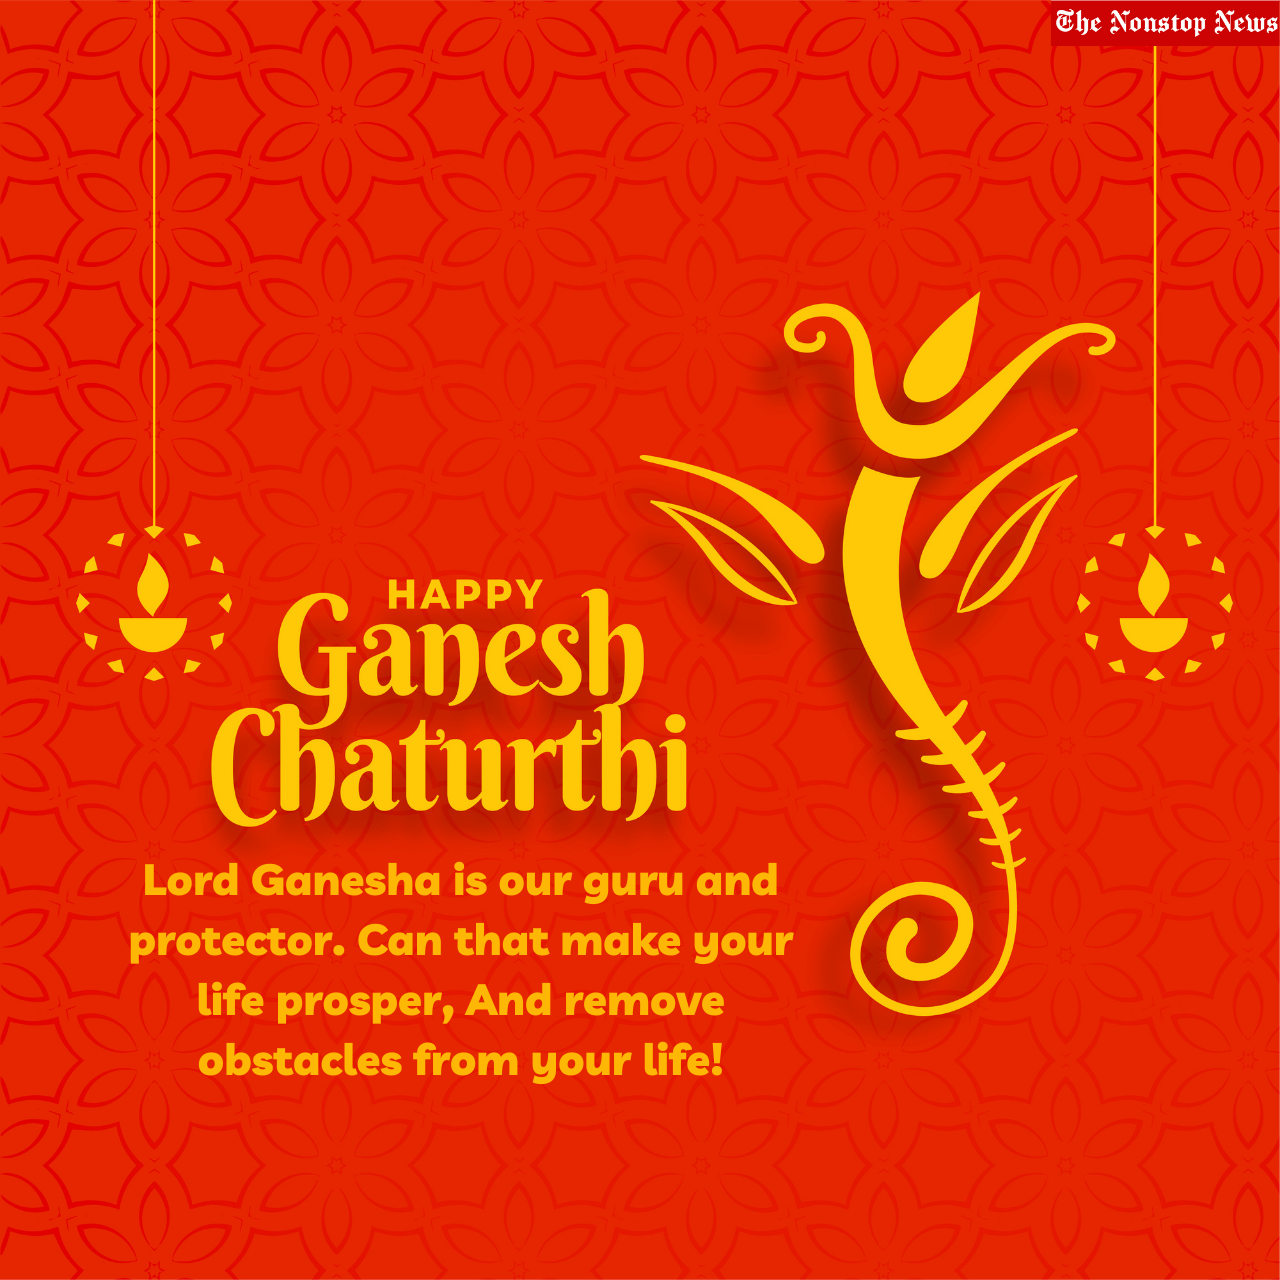 Ganesh Chaturthi 2021 Wishes, Quotes, HD Images, and SMS for Friends, and Relatives